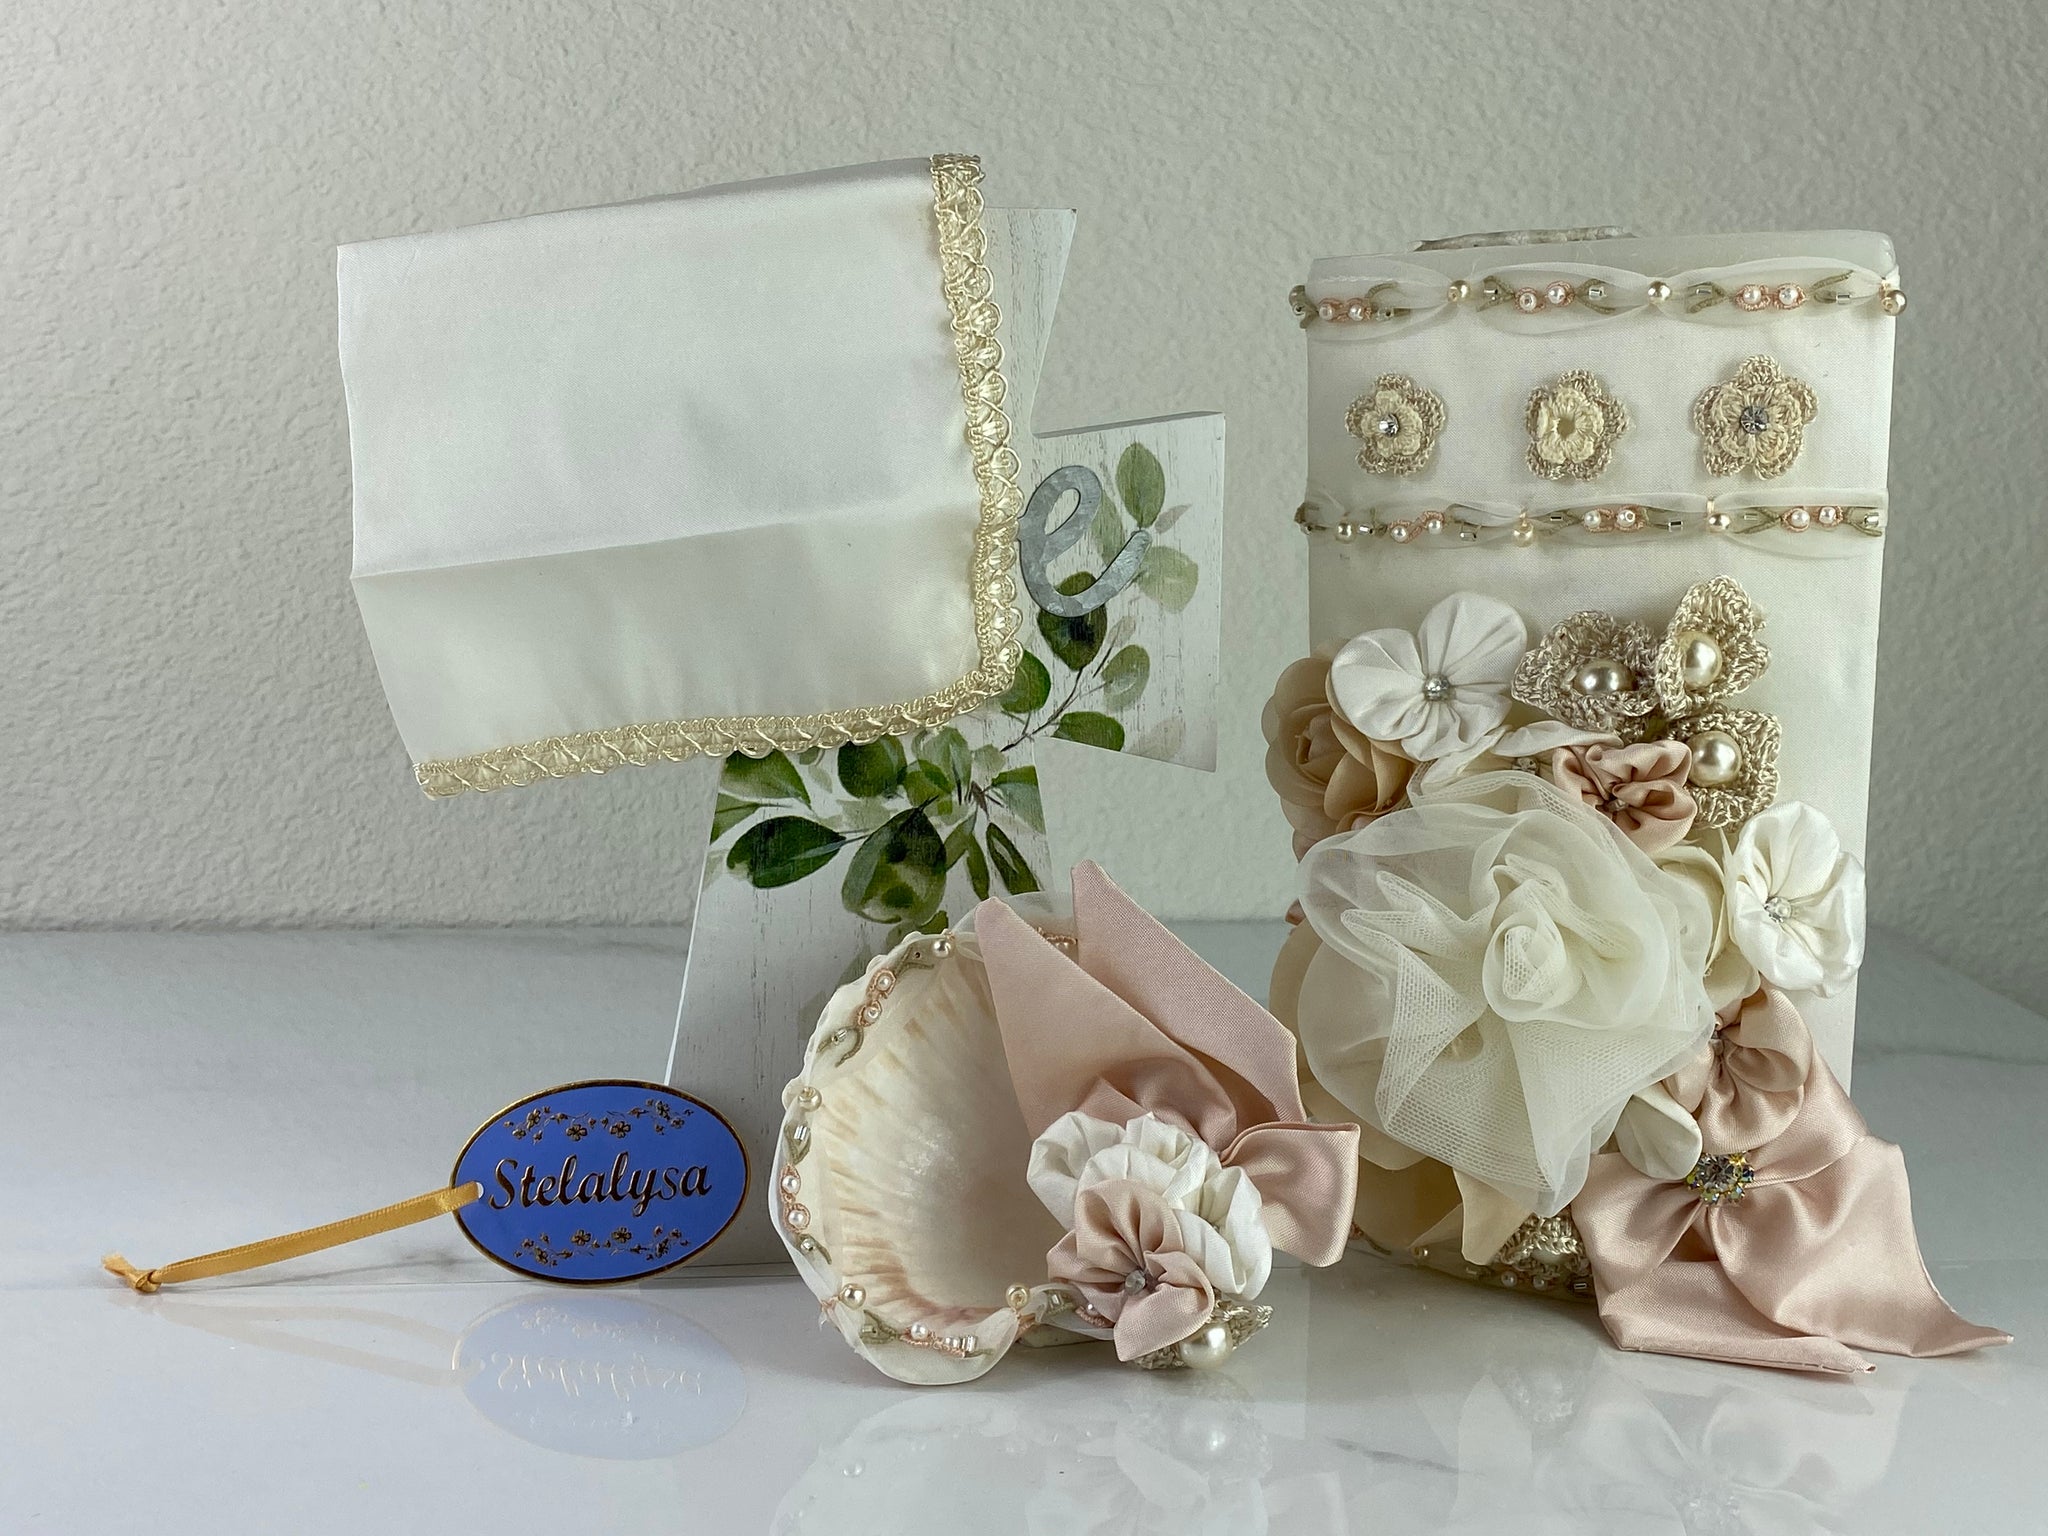 These one-of-a-kind Candle set is handmade and ivory in color.  This candle can also be use with a white baptism outfit because it has an array of light colors including white.   It is uniquely decorated with crochet and satin flowers, ribbon, pearls, crystals, and beads making it a gorgeous keepsake.   This candle is oval in shape.    To match, the Shell is put together piece by piece to compliment the Candle and Handkerchief. 